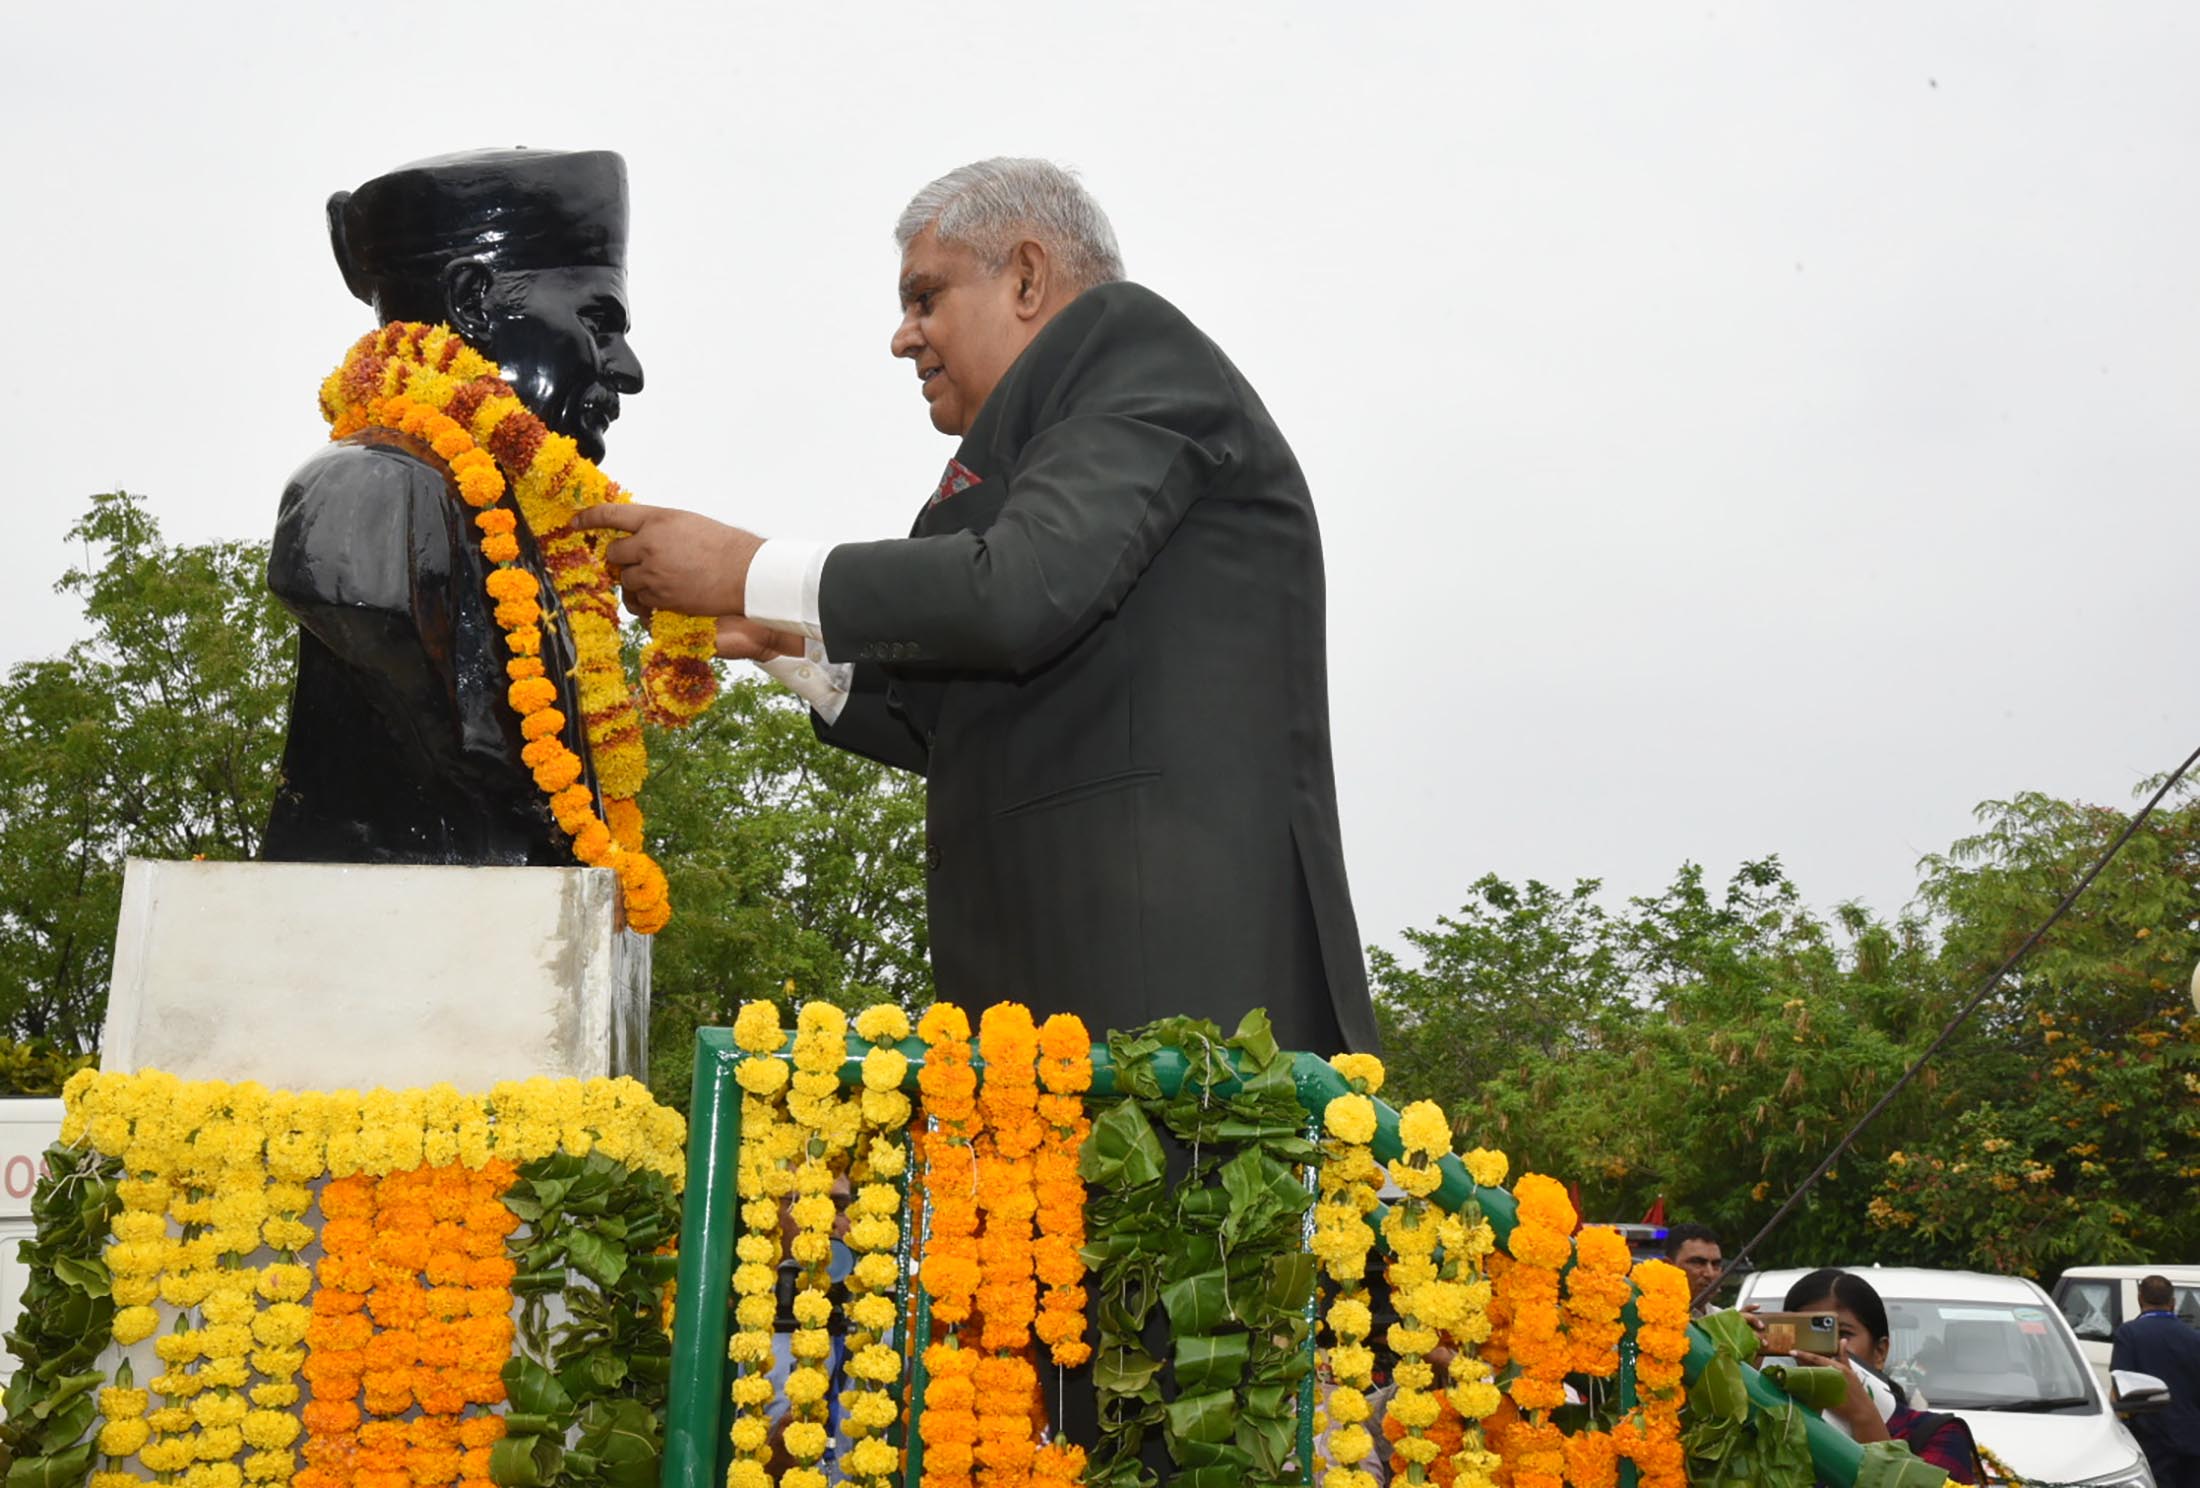 The Vice President, Shri Jagdeep Dhankhar paying floral tributes to the statue of Madan Mohan Malaviya at Malaviya National Institute of Technology in Jaipur, Rajasthan on June 23, 2023.